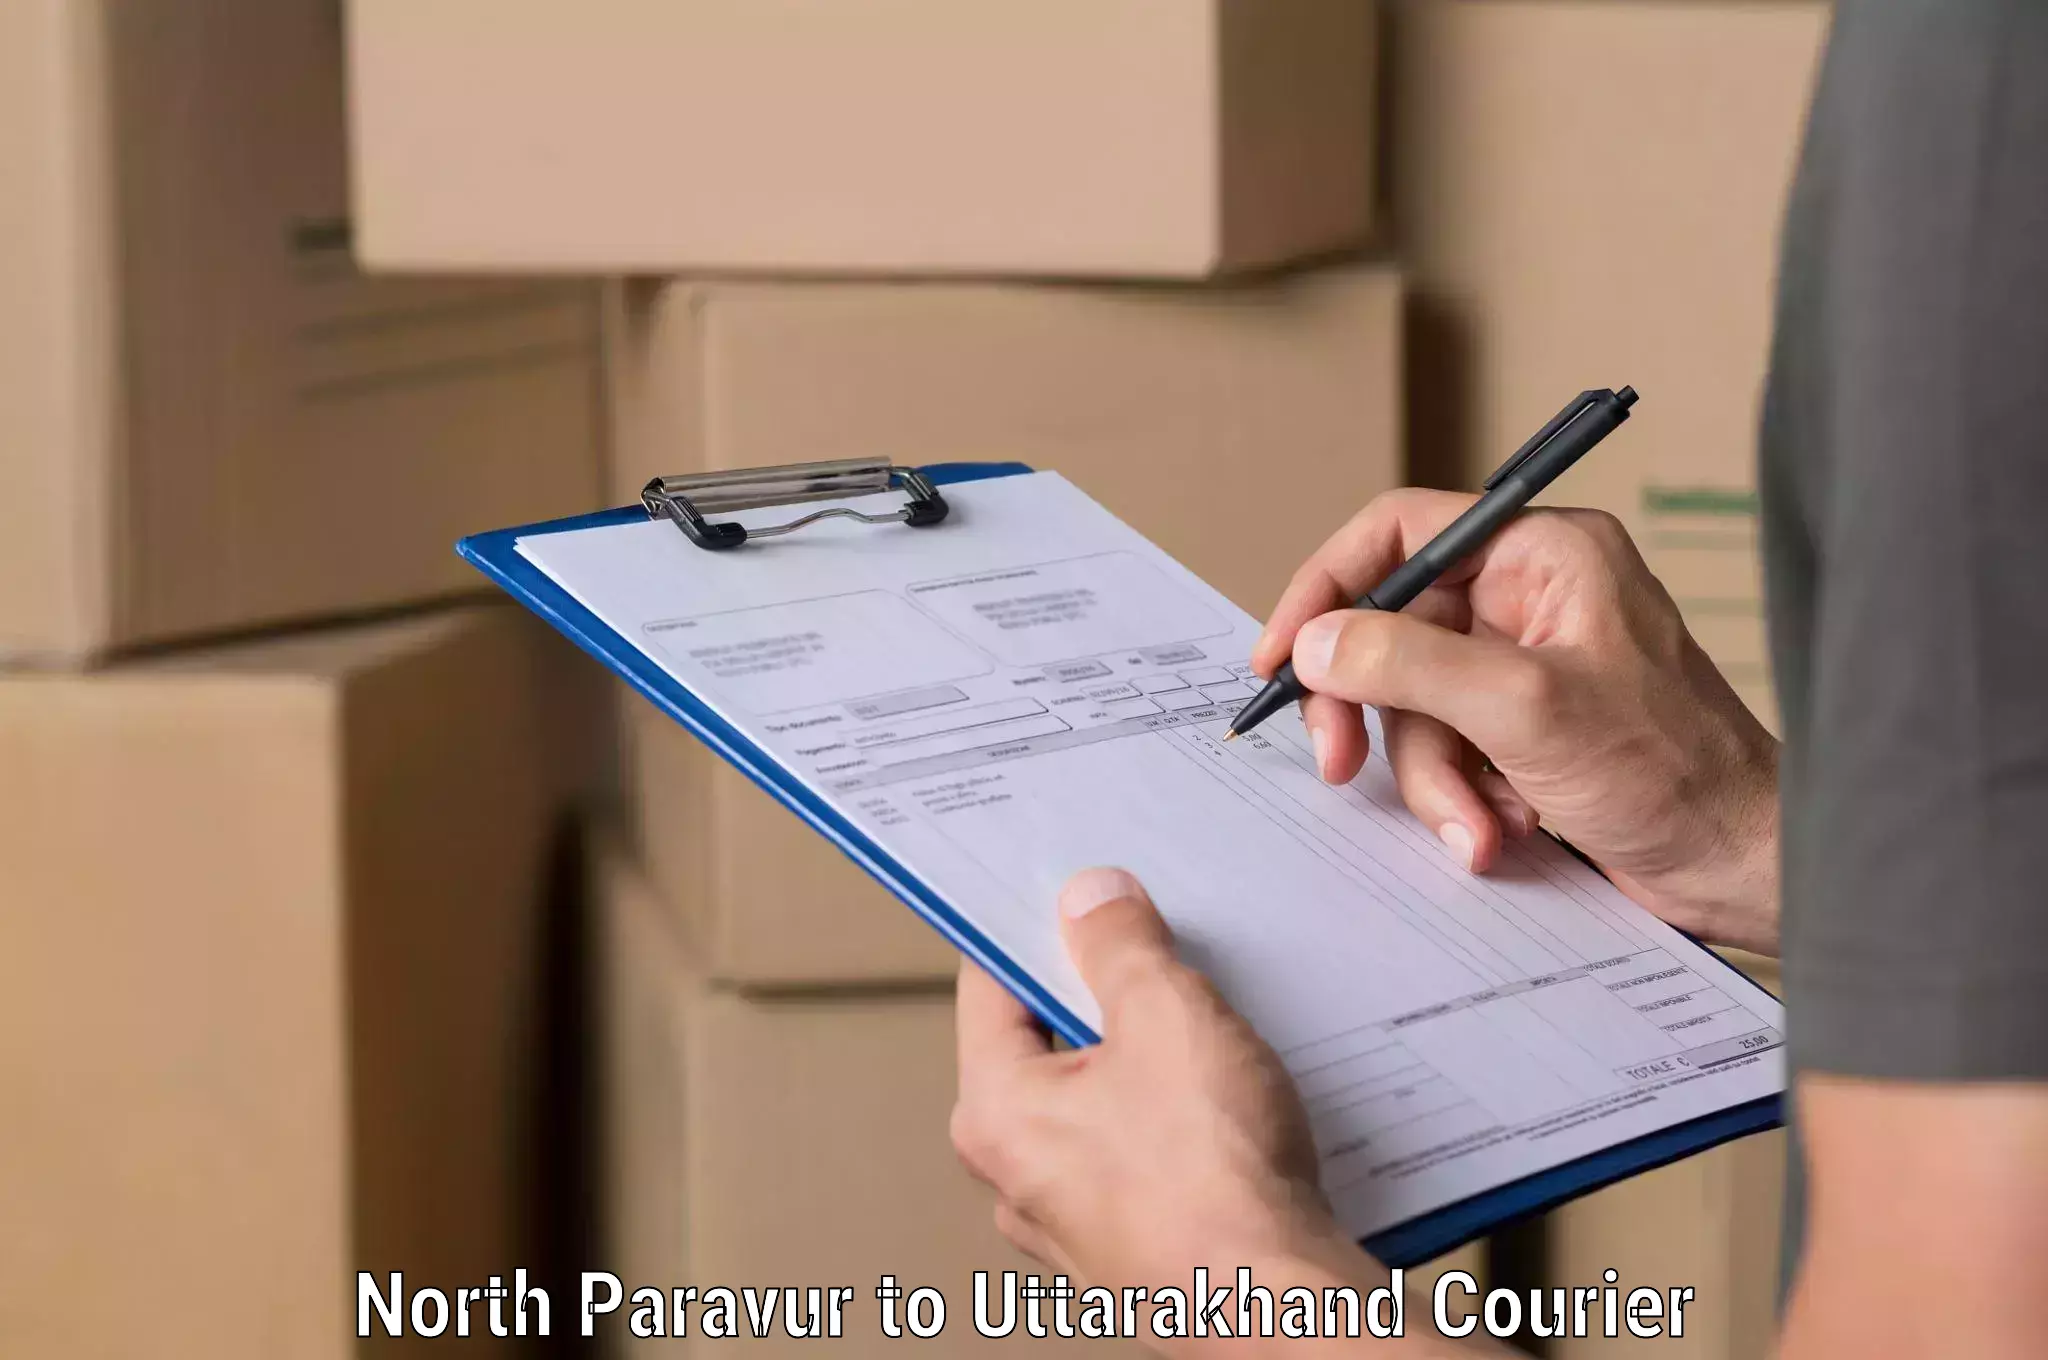 Professional courier handling North Paravur to Paithani